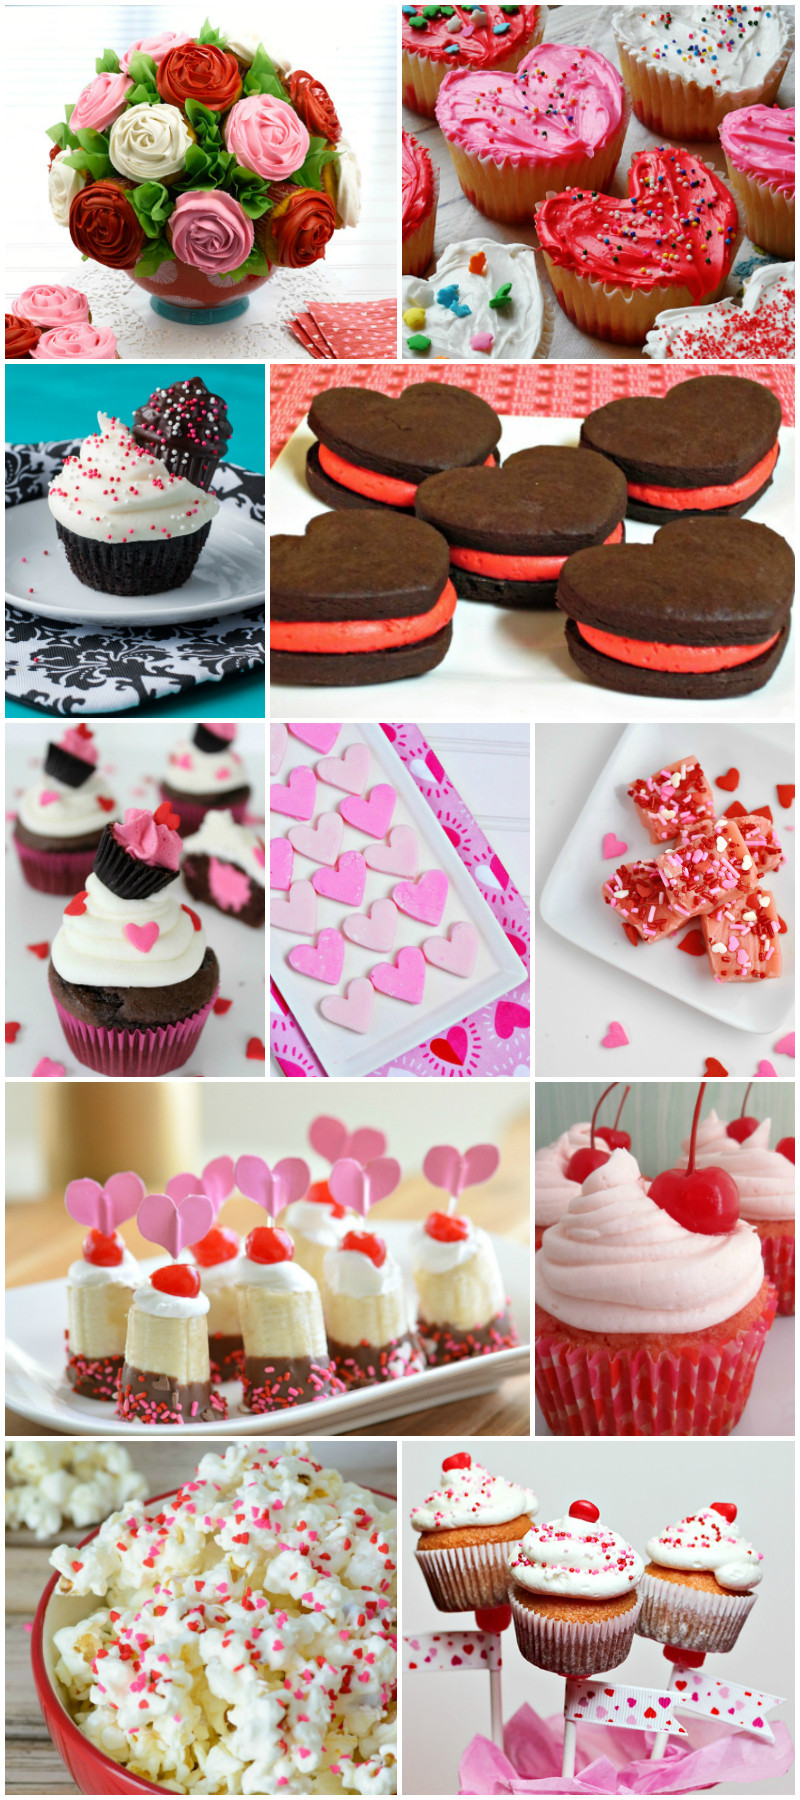 Recipes For Valentine'S Day Desserts
 50 Cute and Delicious Valentine’s Day Dessert Recipes